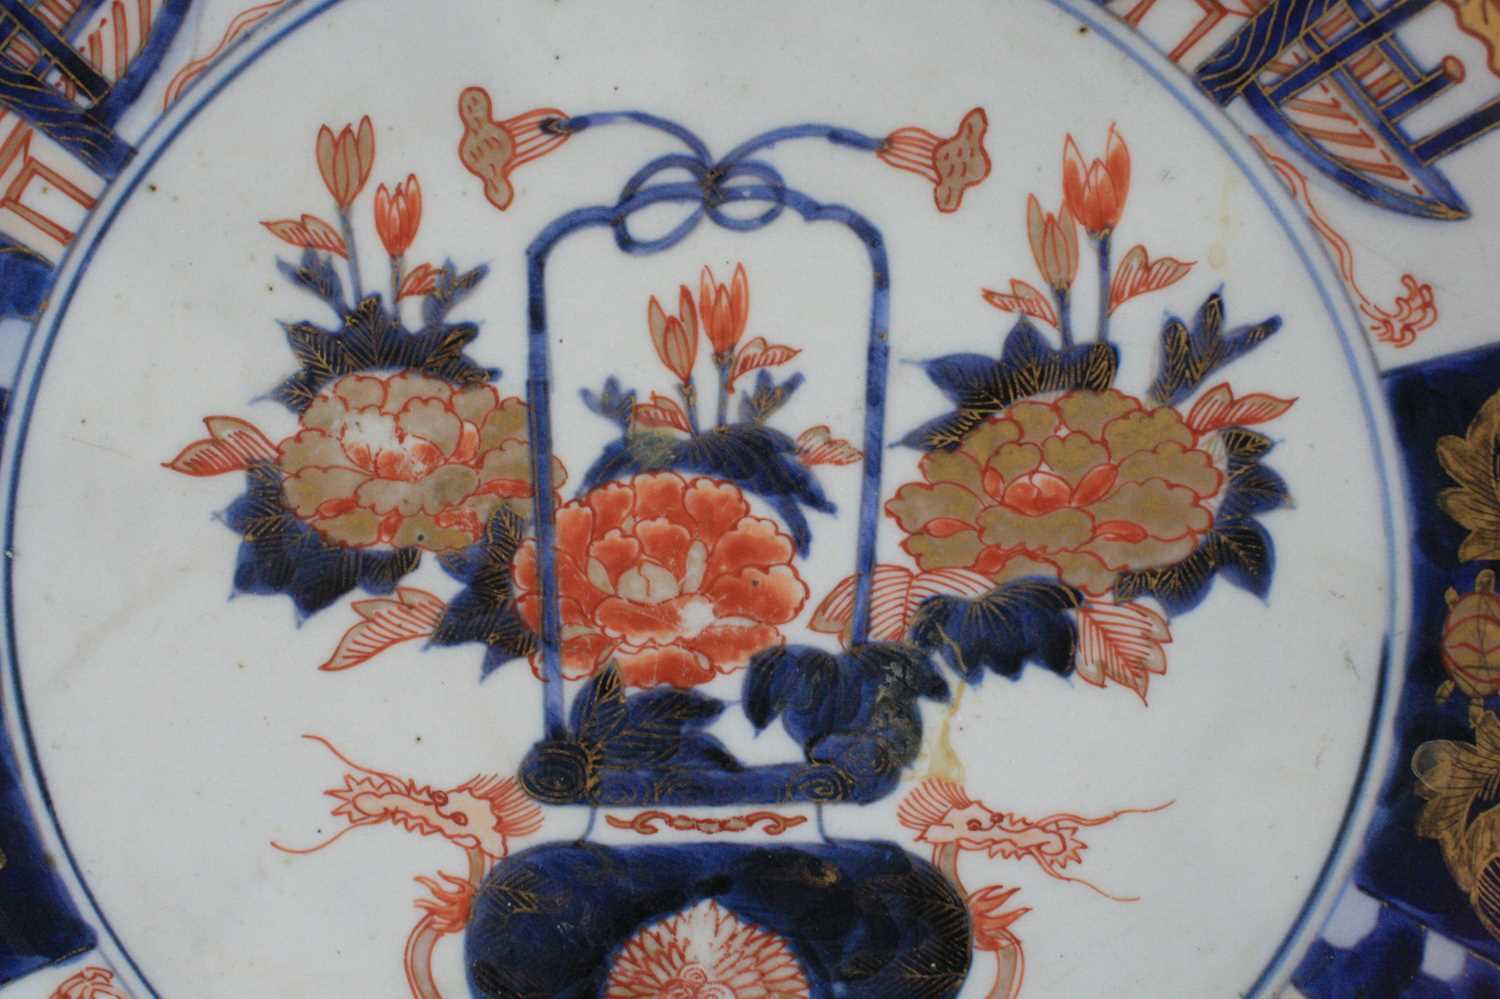 A Japanese Imari porcelain charger, 18th century, decorated with a basket of flowers within a border - Image 2 of 4